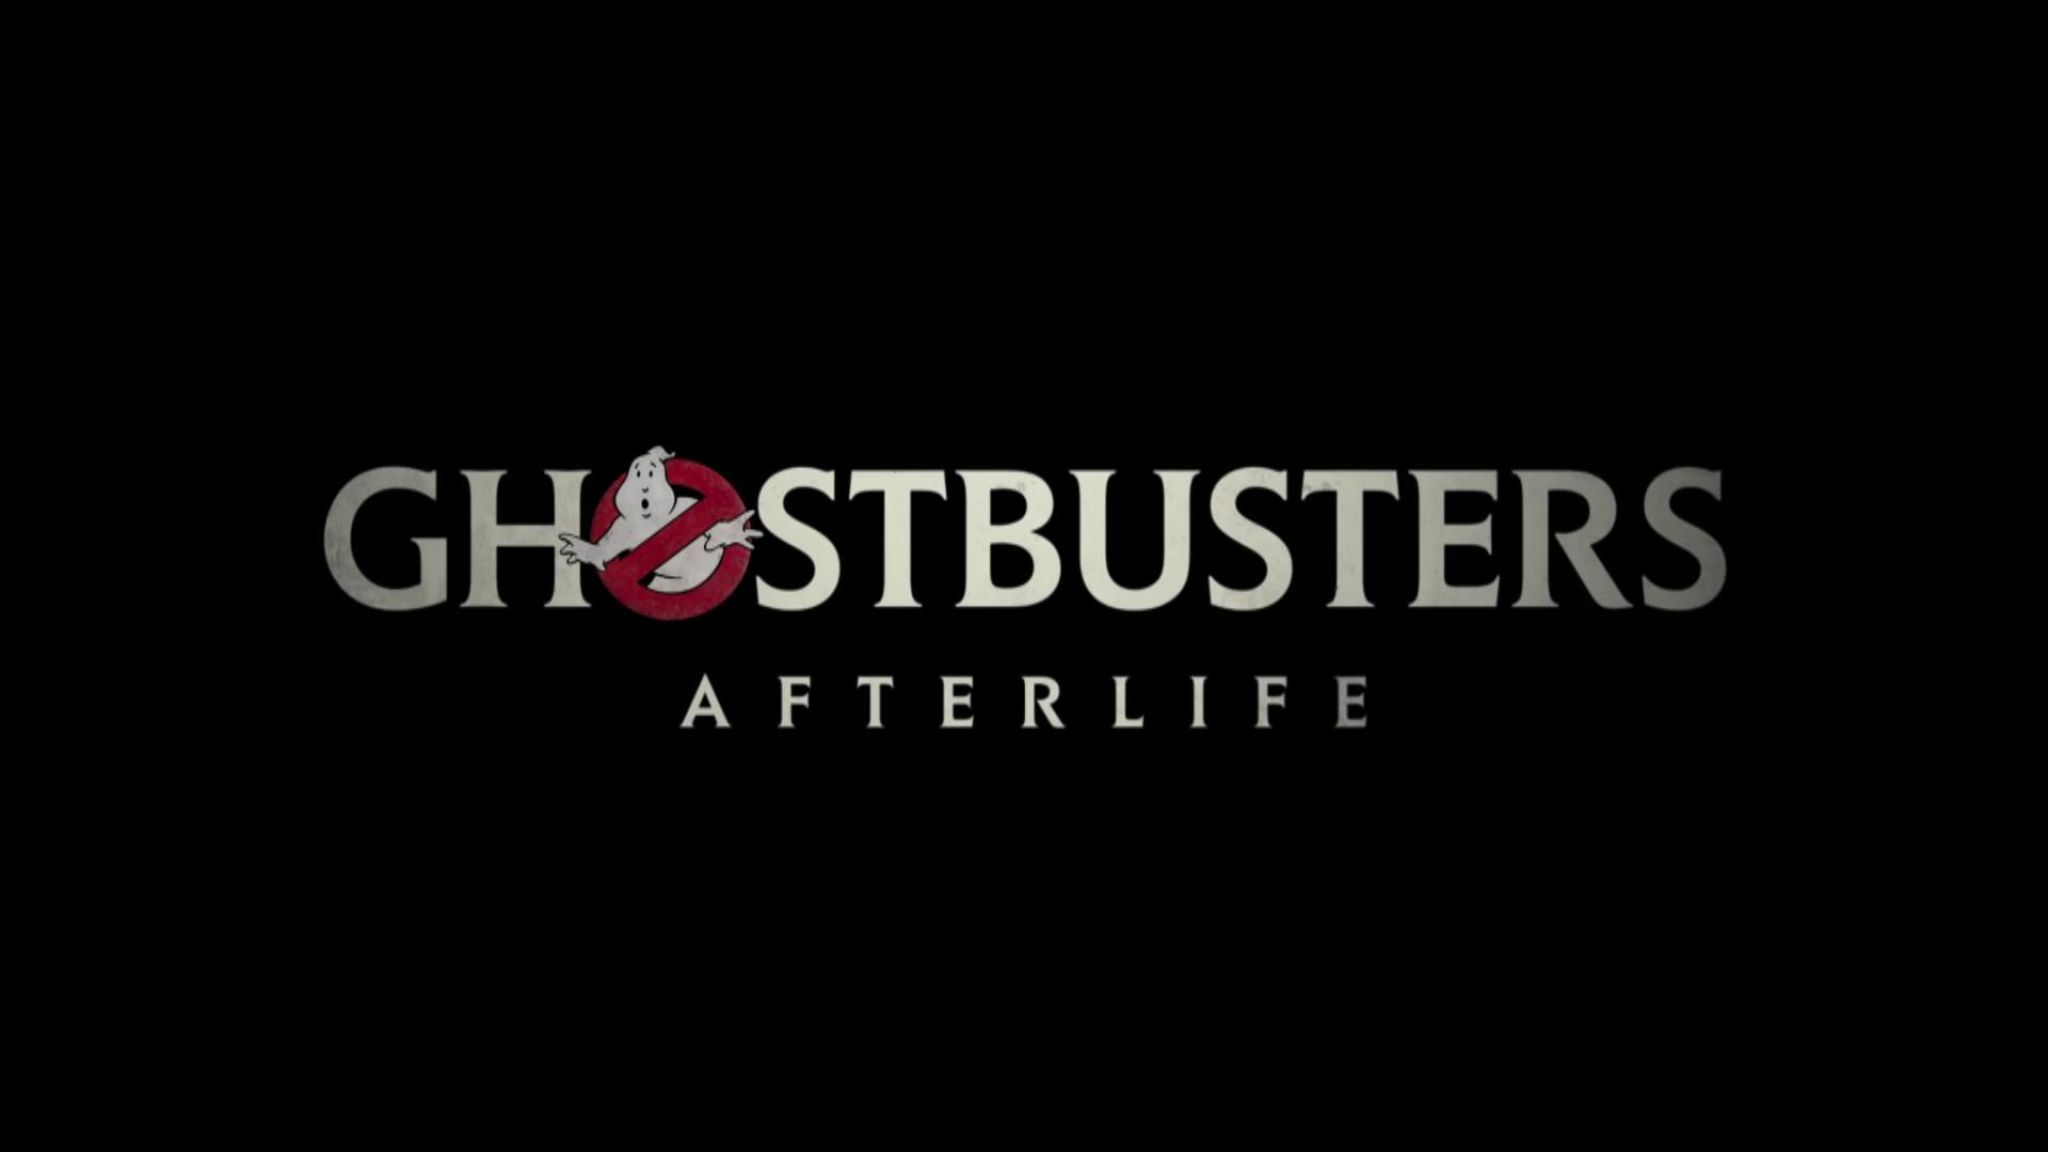 Ghostbusters Afterlife Trailer Released Ahead Of Premiere